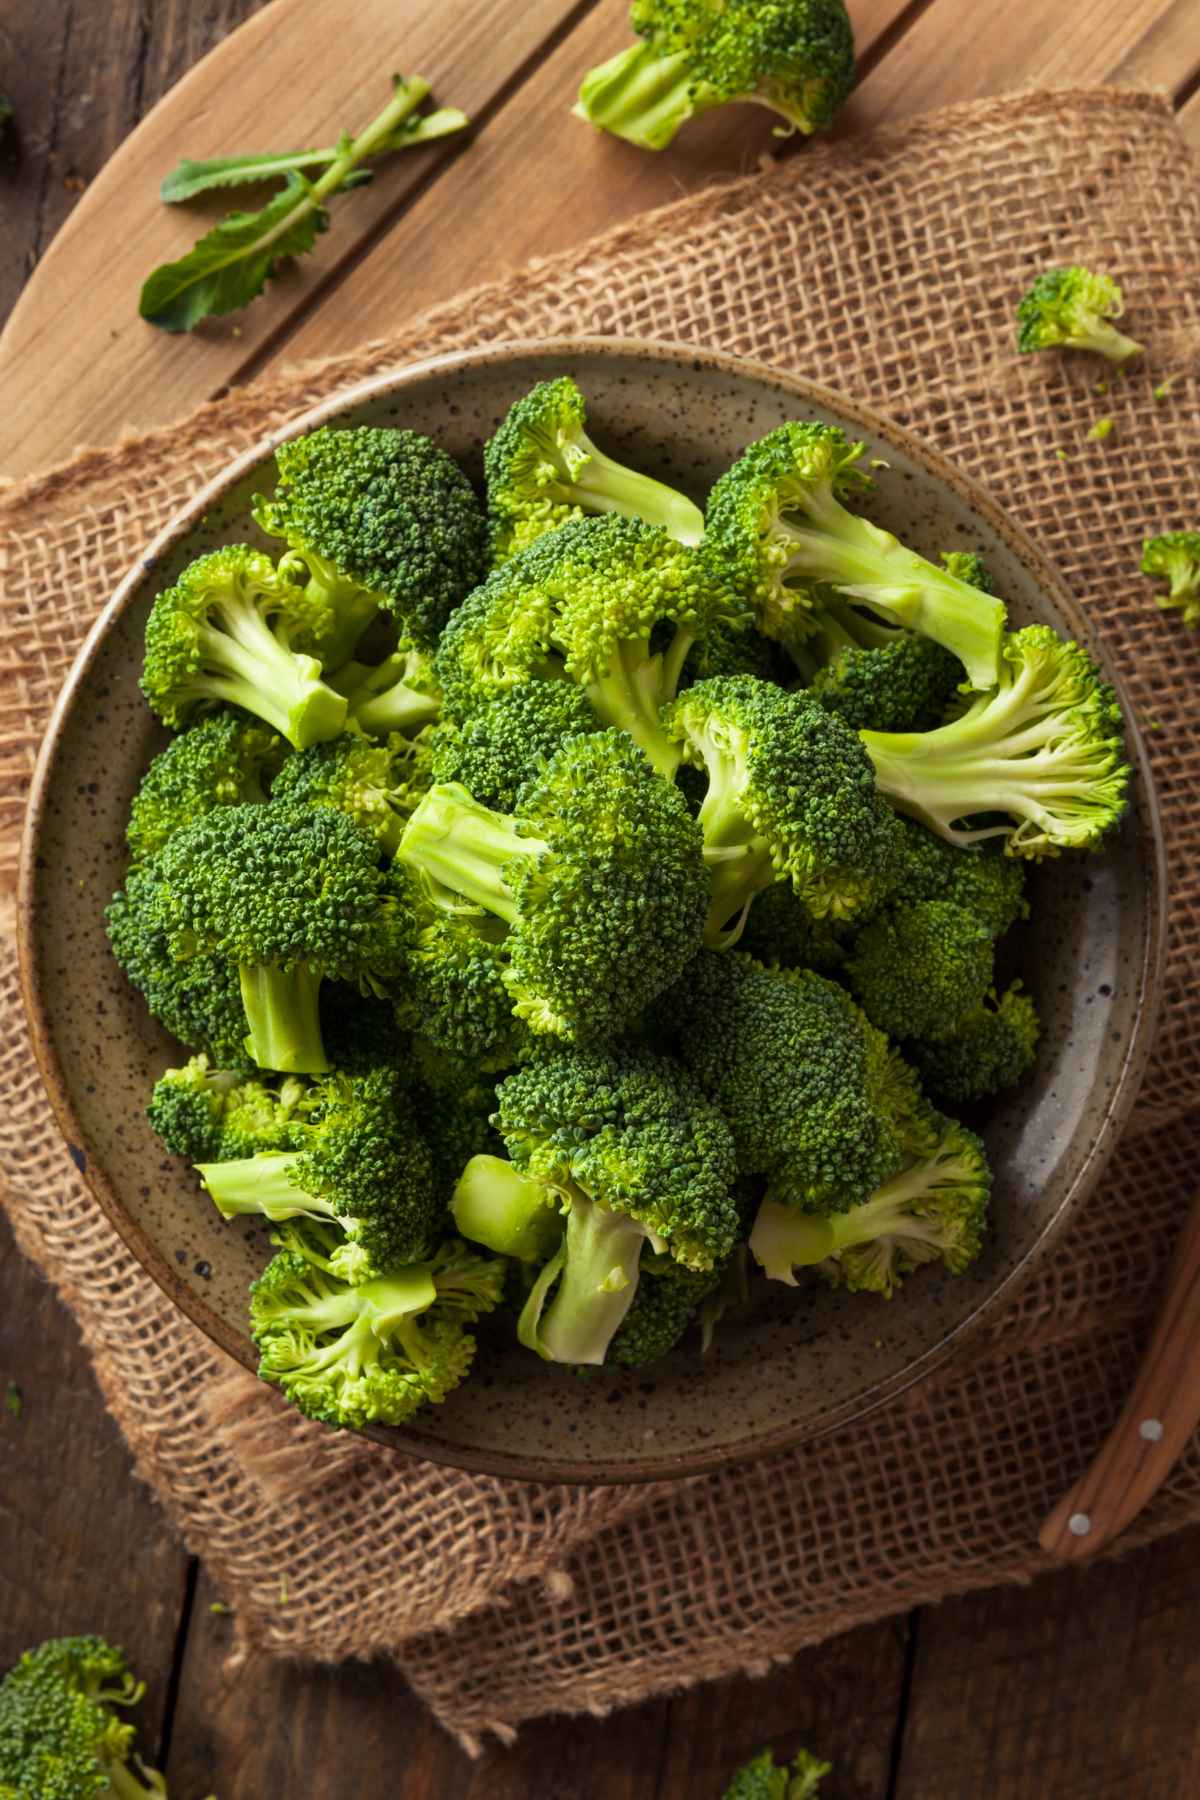 Is broccoli keto? How many carbs are in broccoli? Versatile, nutritious, and delicious, broccoli is a healthy green side dish that can be enjoyed in numerous ways. Read on to find out more about this veggie and whether or not it is suitable for your new keto lifestyle.